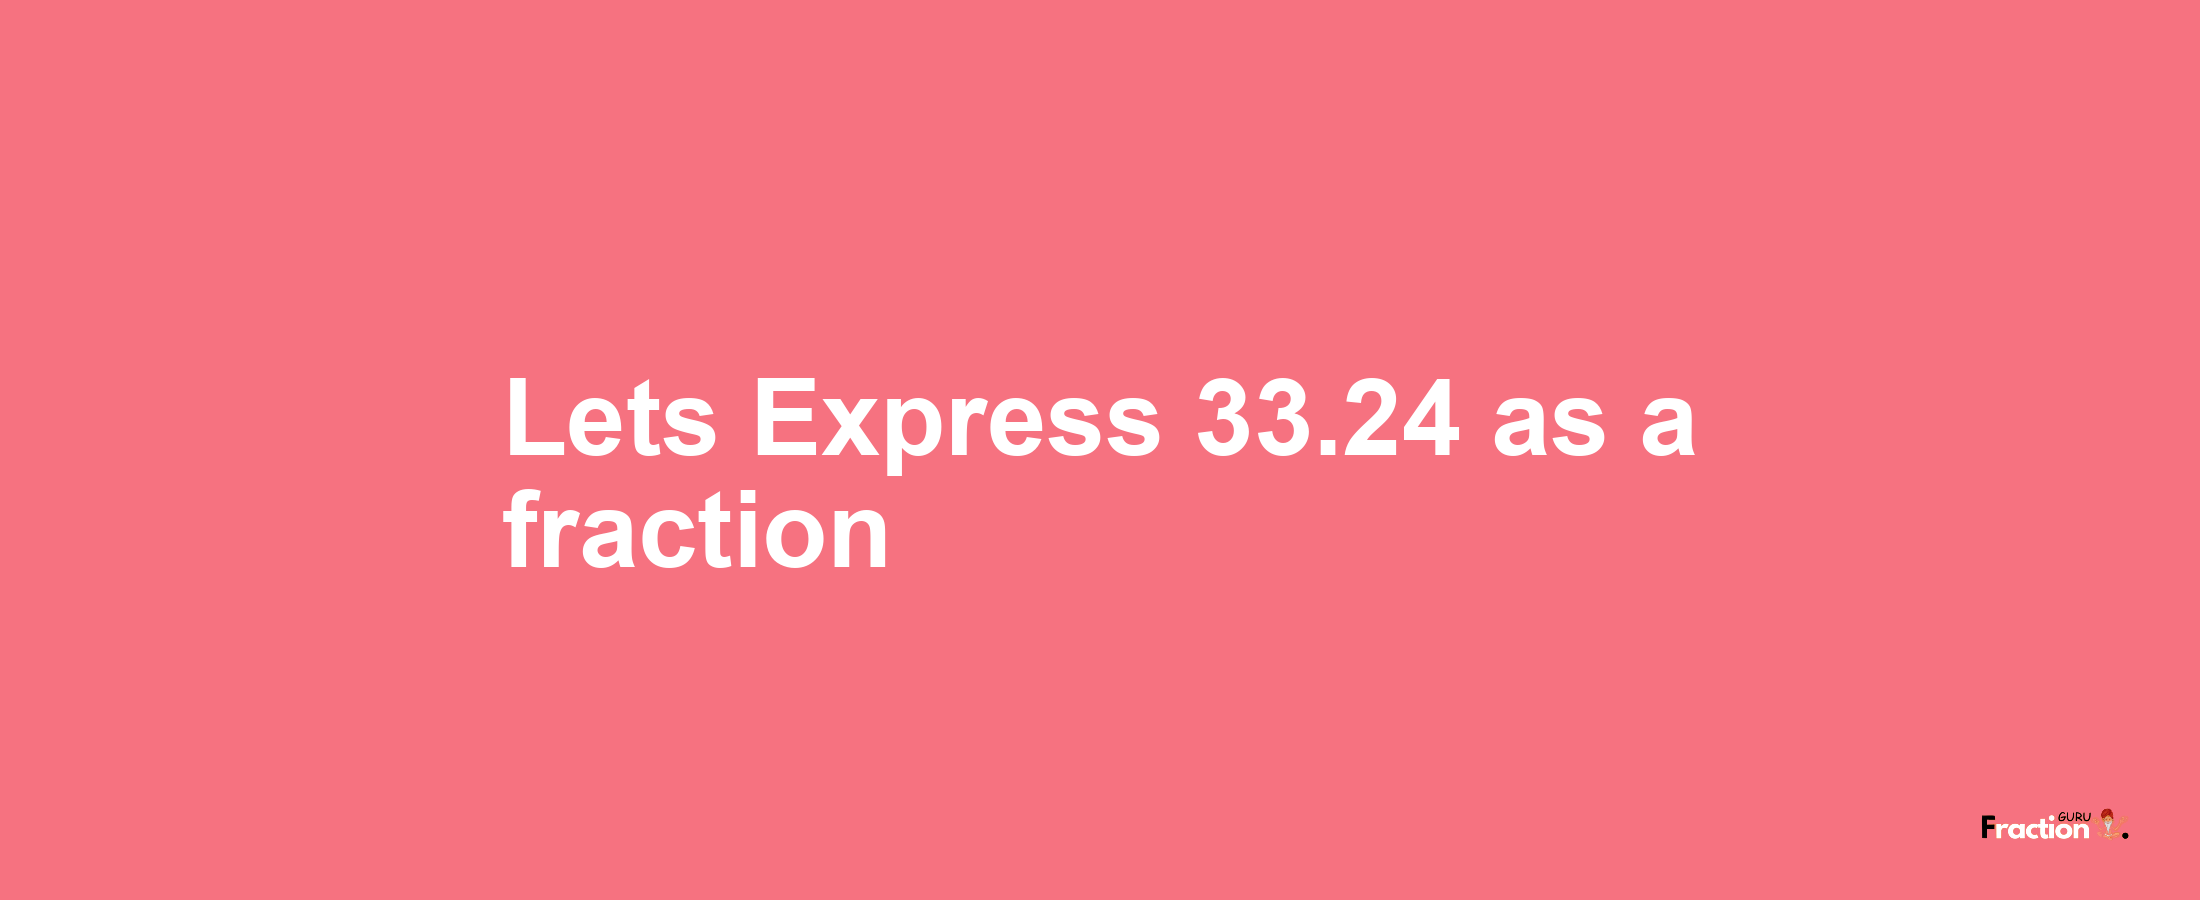 Lets Express 33.24 as afraction